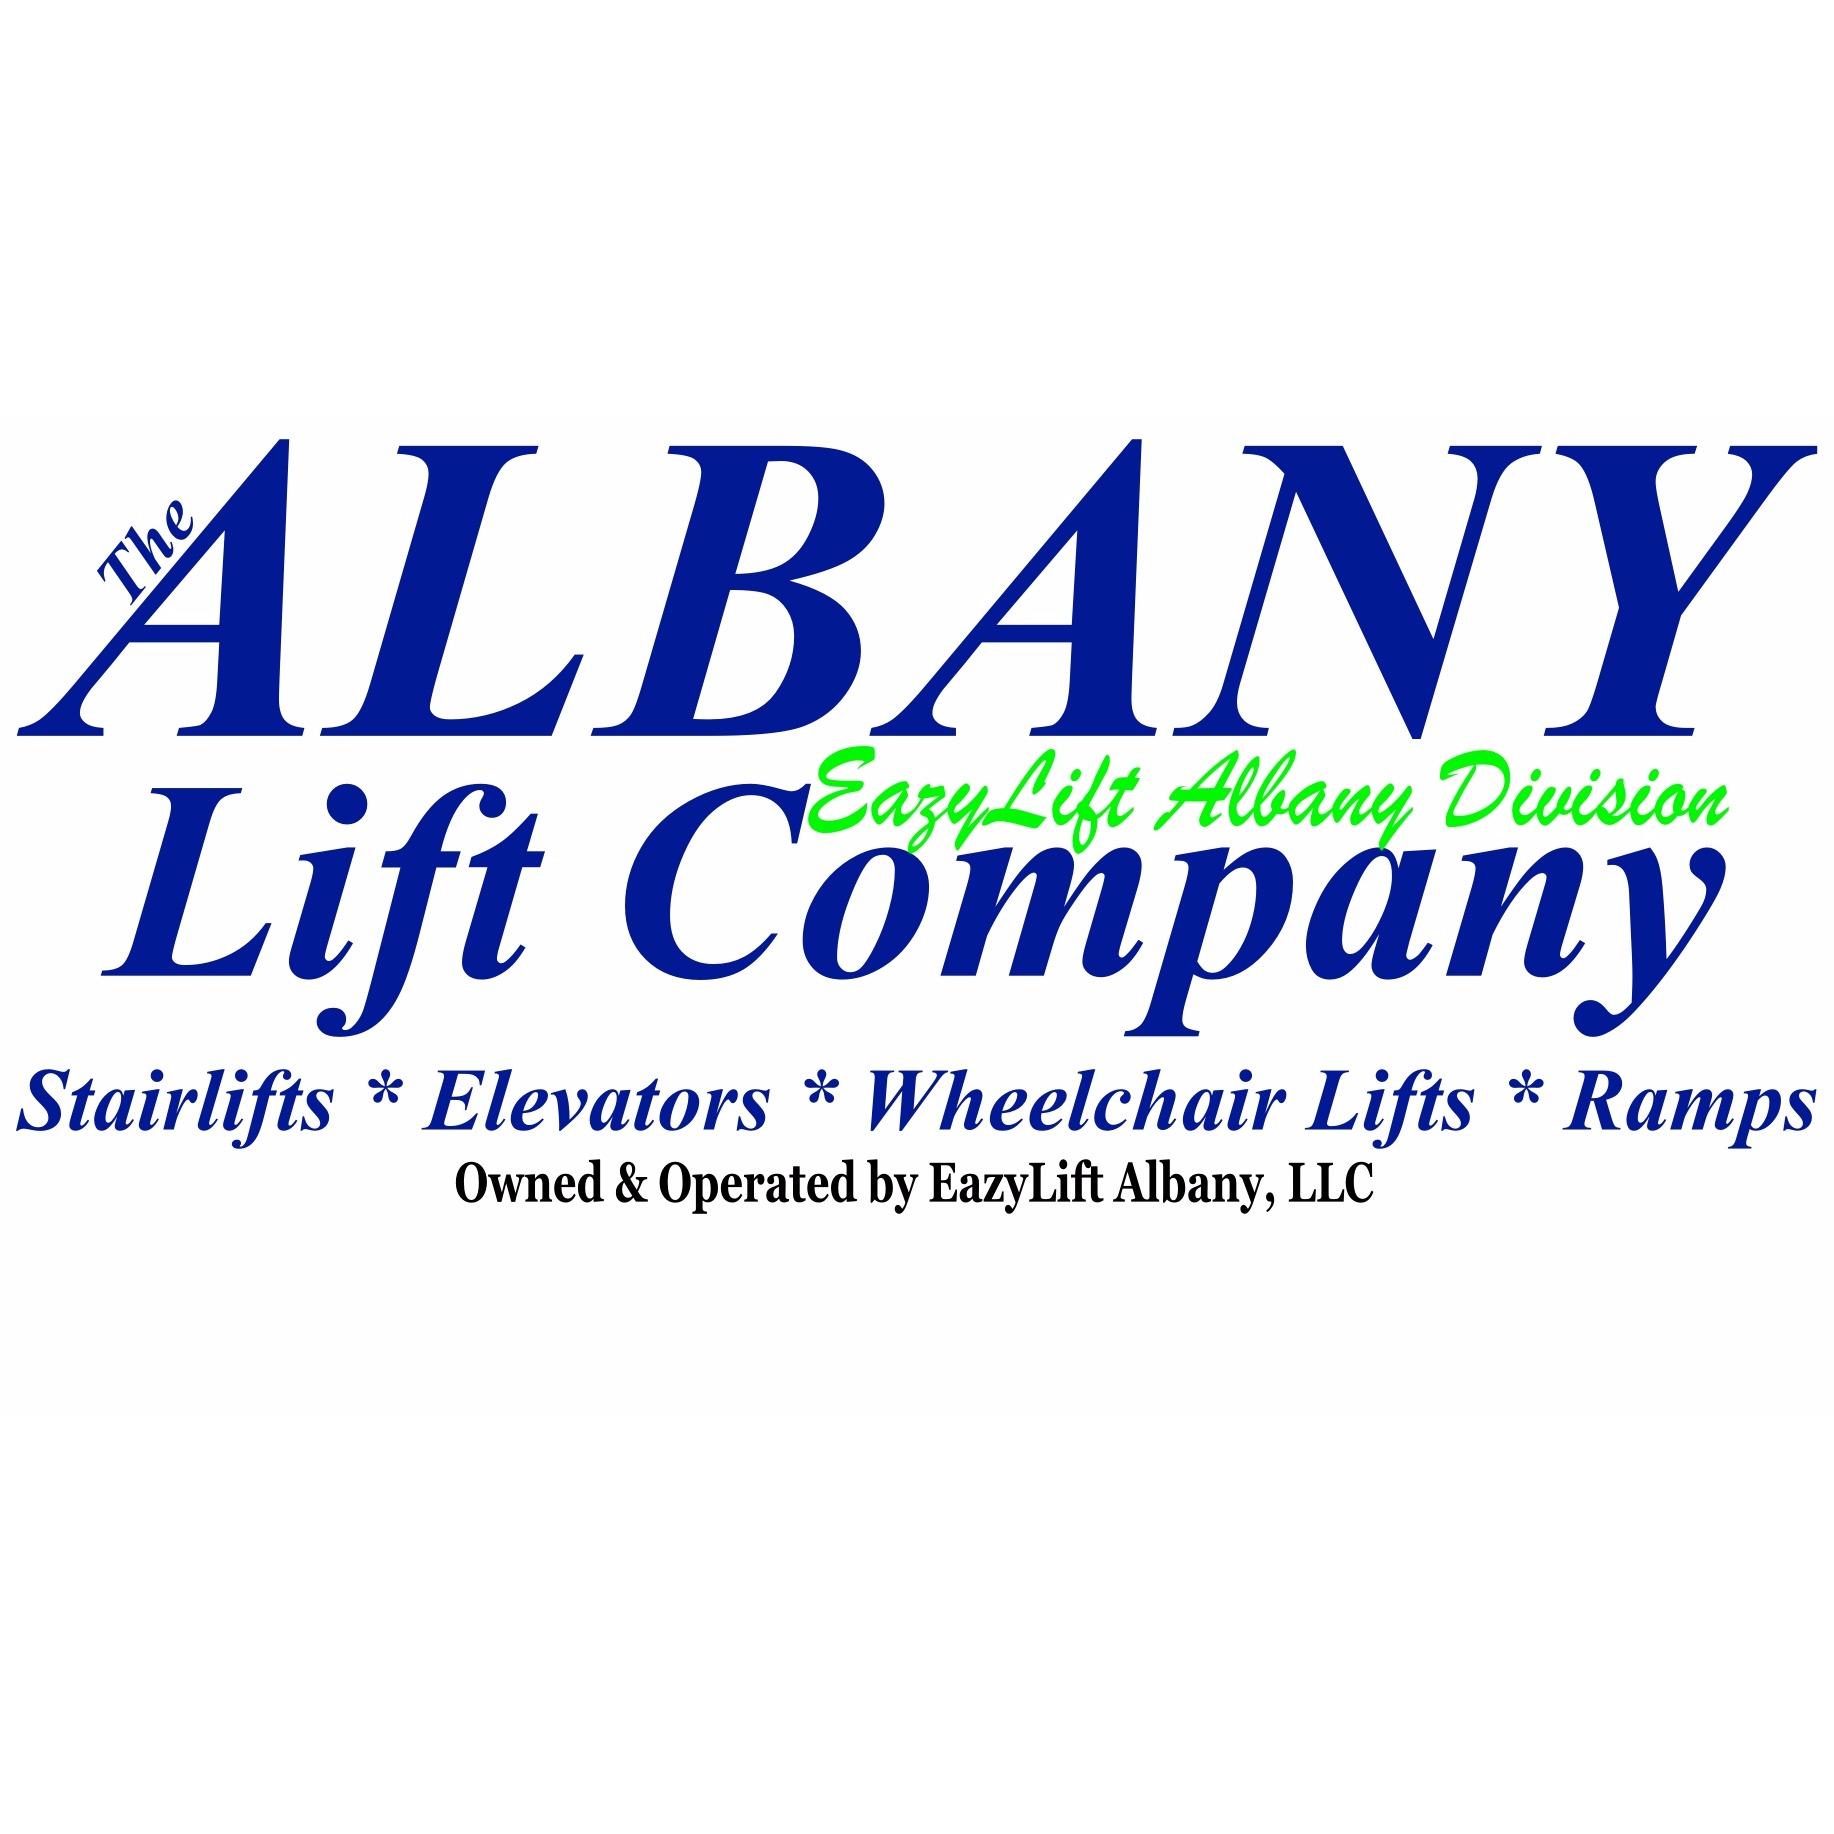 The Albany Lift Company, Owned & Operated by EazyLift Albany, LLC Logo